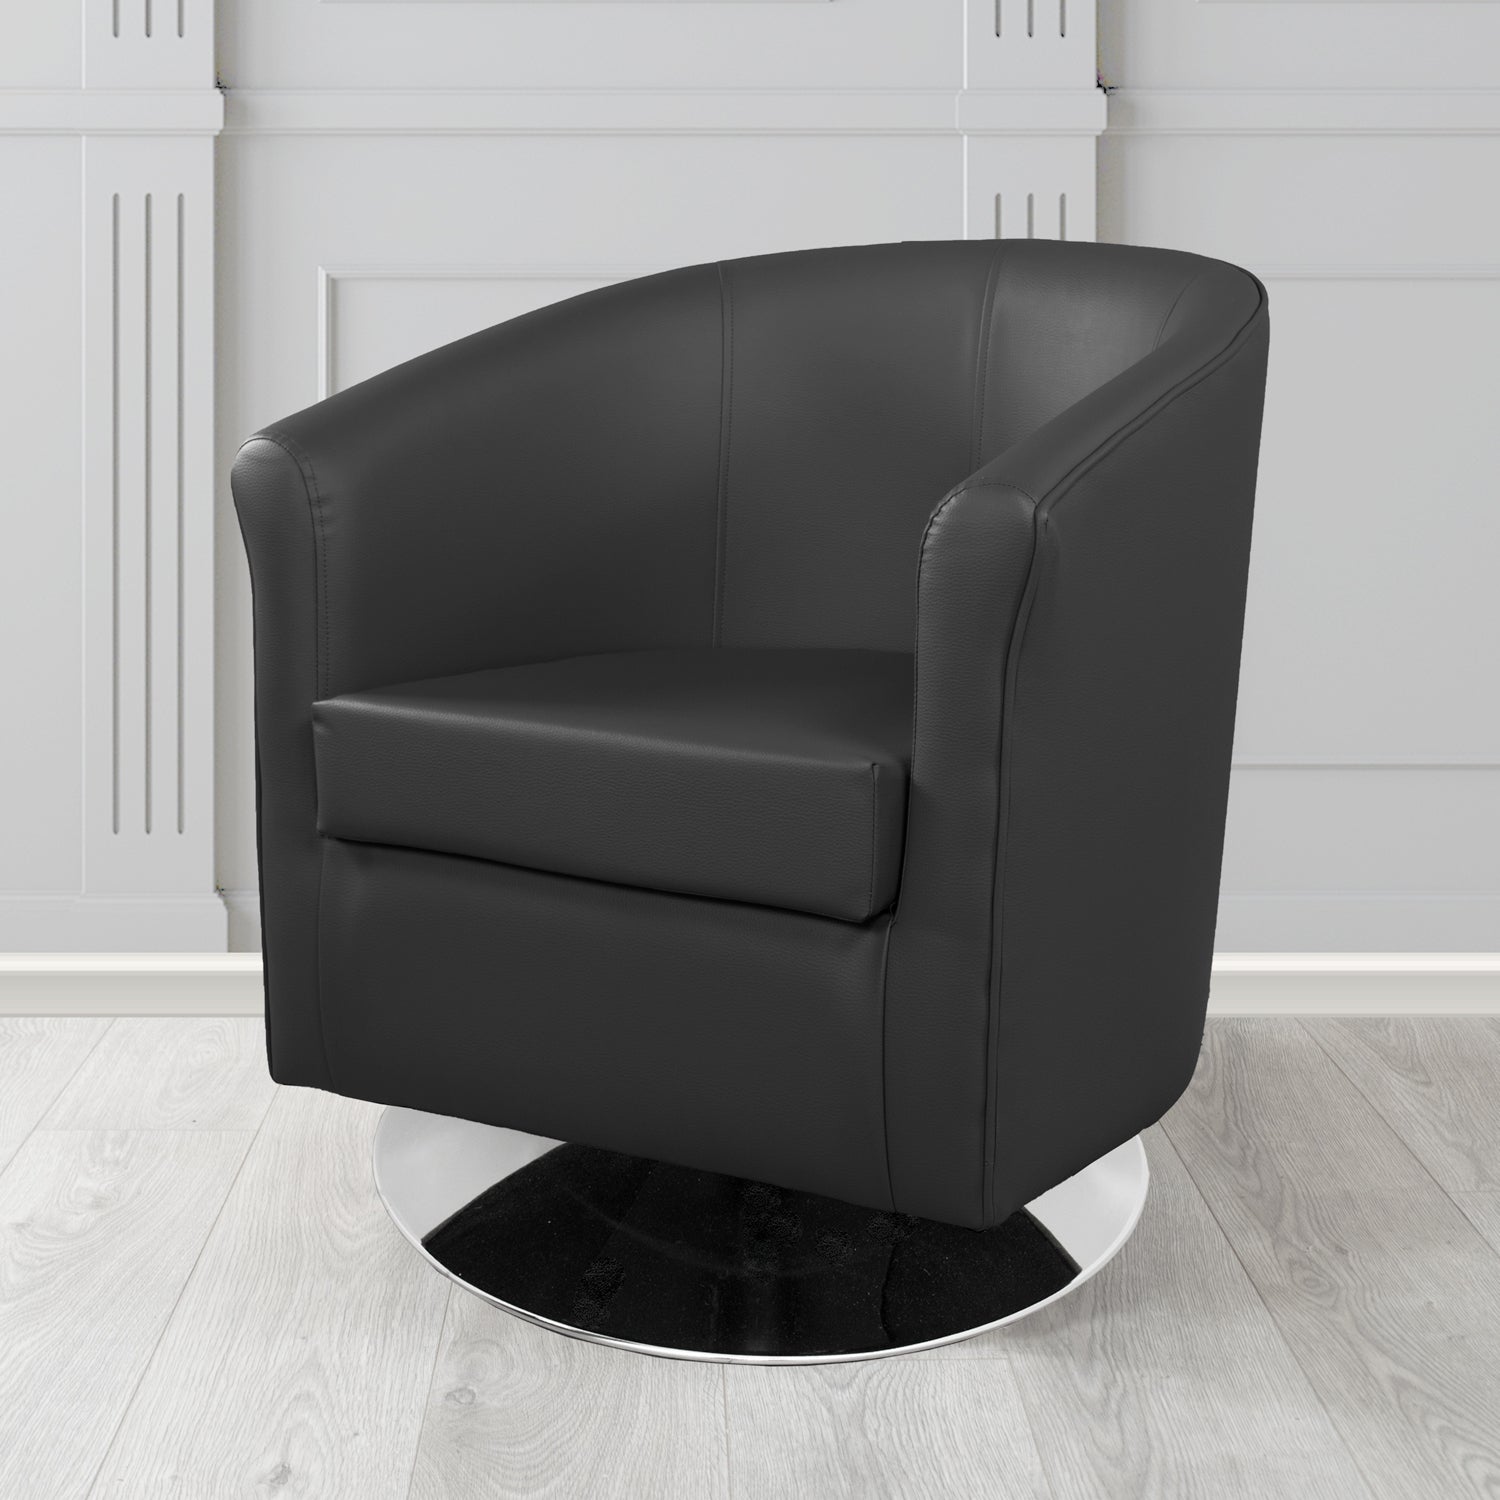 Tuscany Swivel Tub Chair in Madrid Black Faux Leather - The Tub Chair Shop